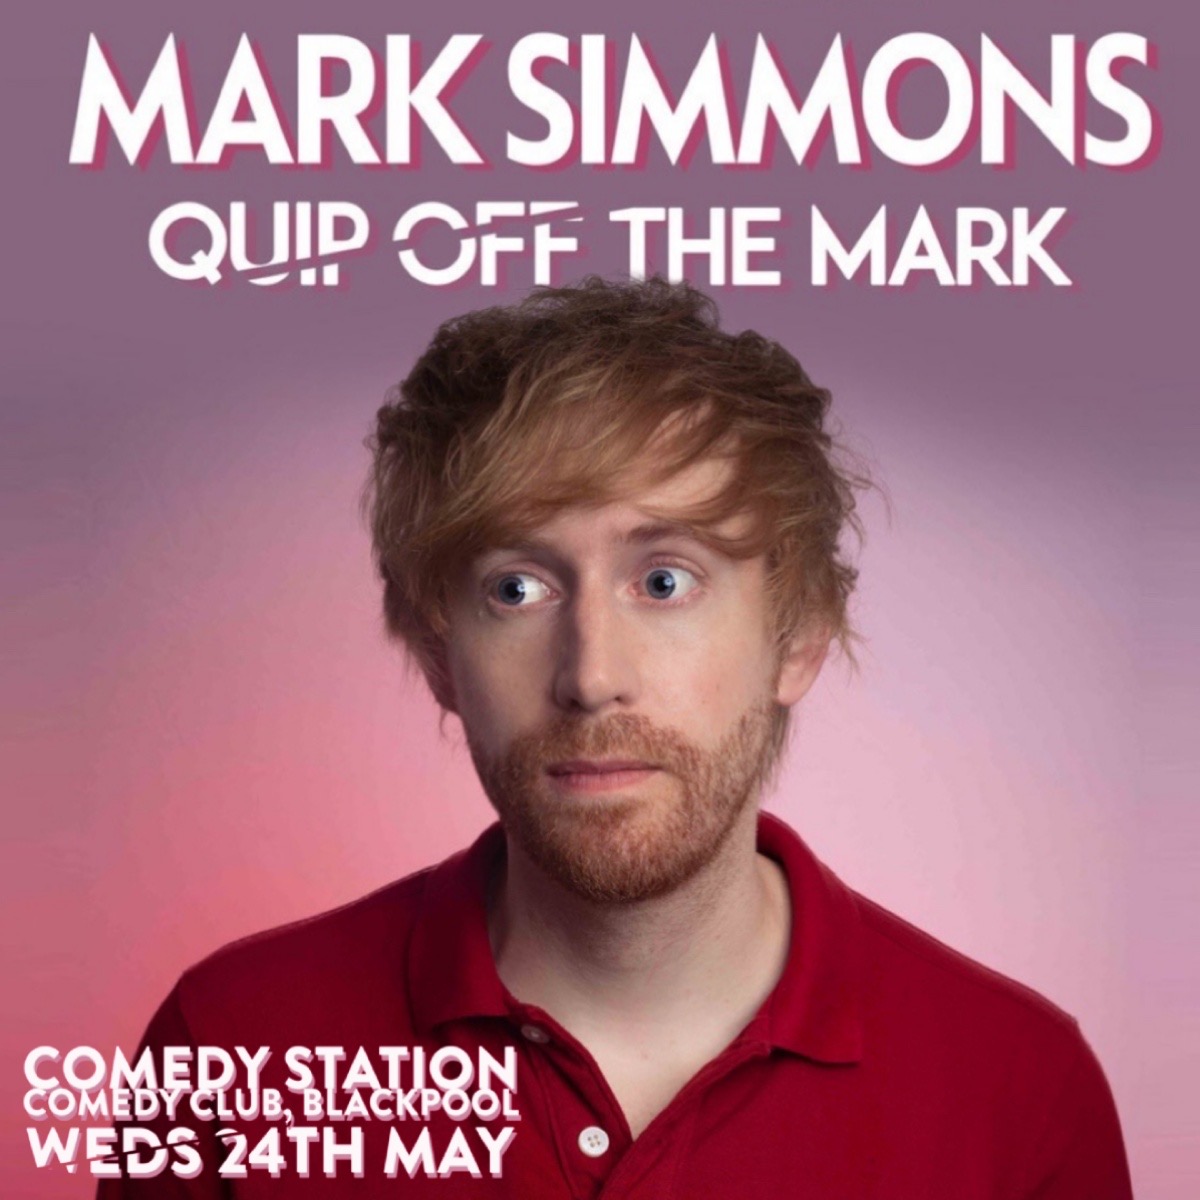 Mark Simmons Quip Off The Mark Blackpool Comedy Station Comedy Club